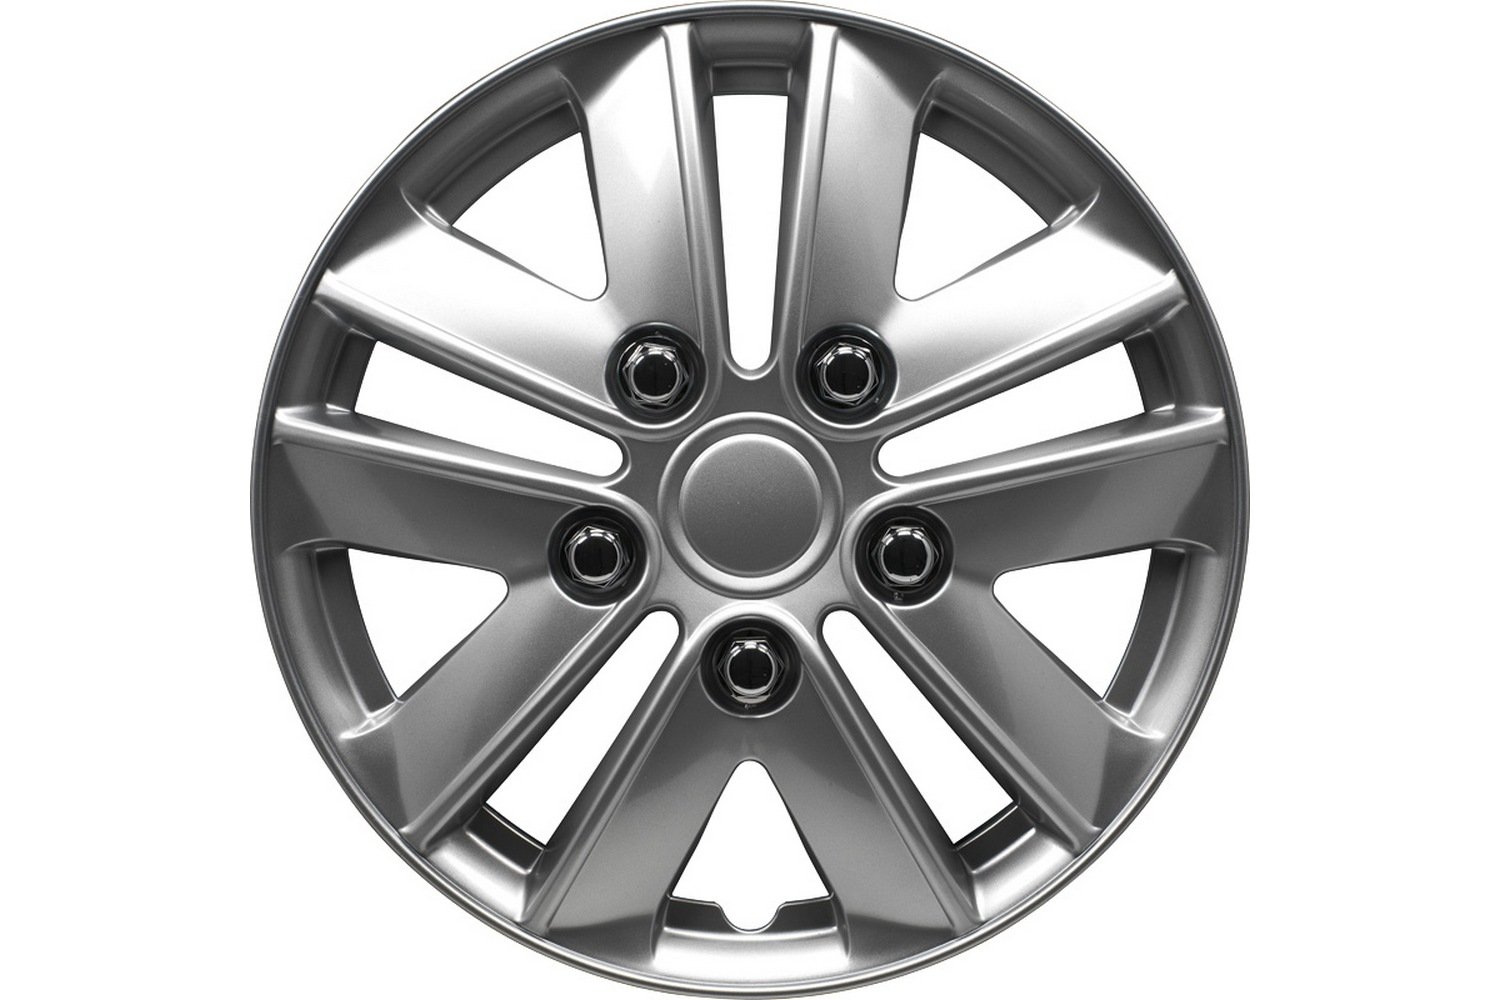 Wheel covers Kentucky 15 inch set 4 pieces